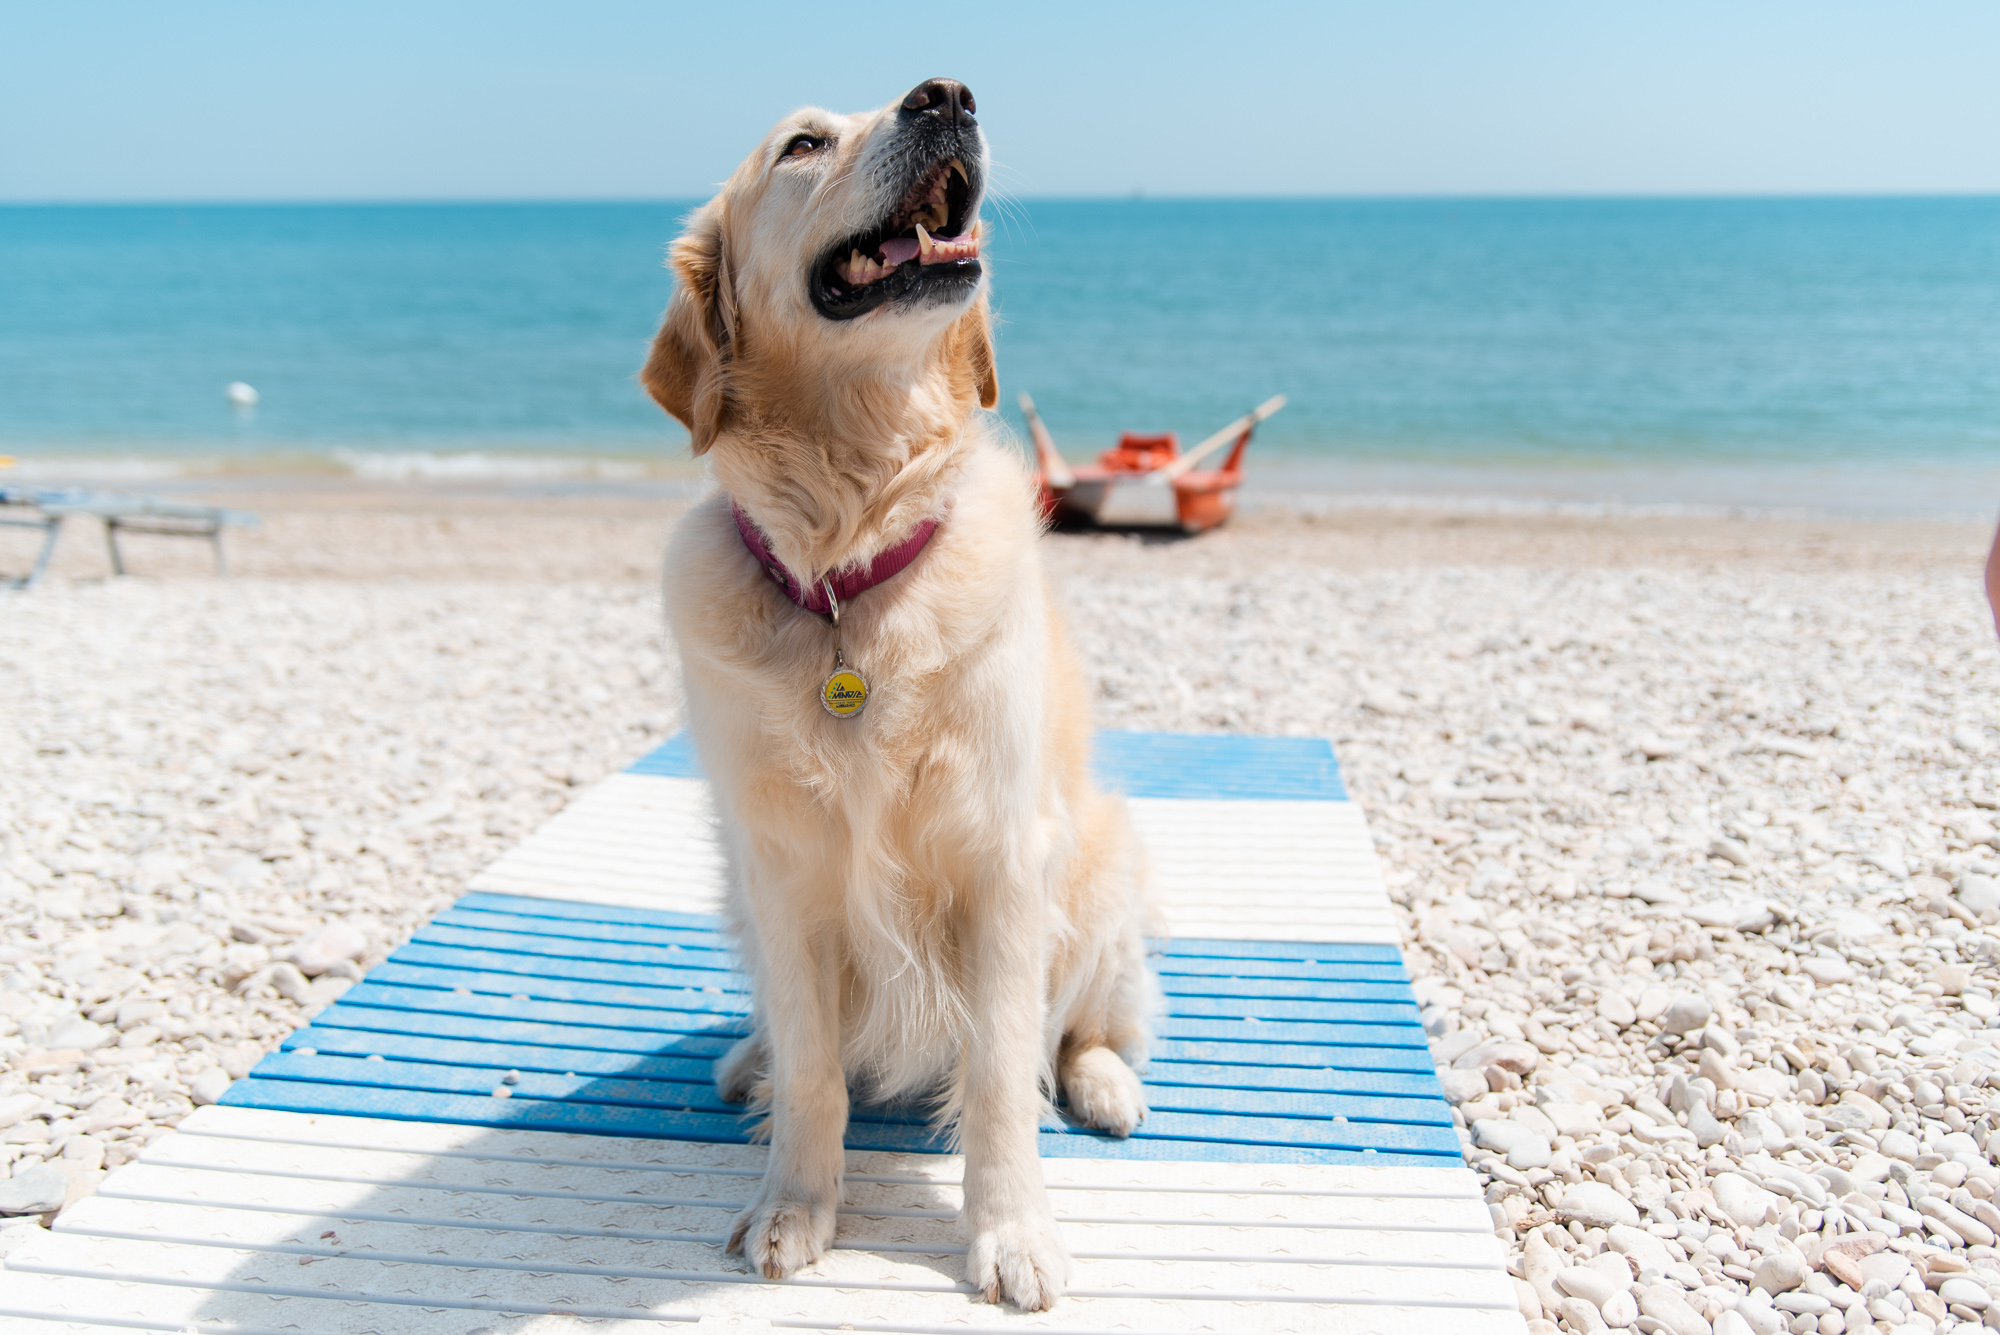 Let's go to the beach... and bring Fido along!